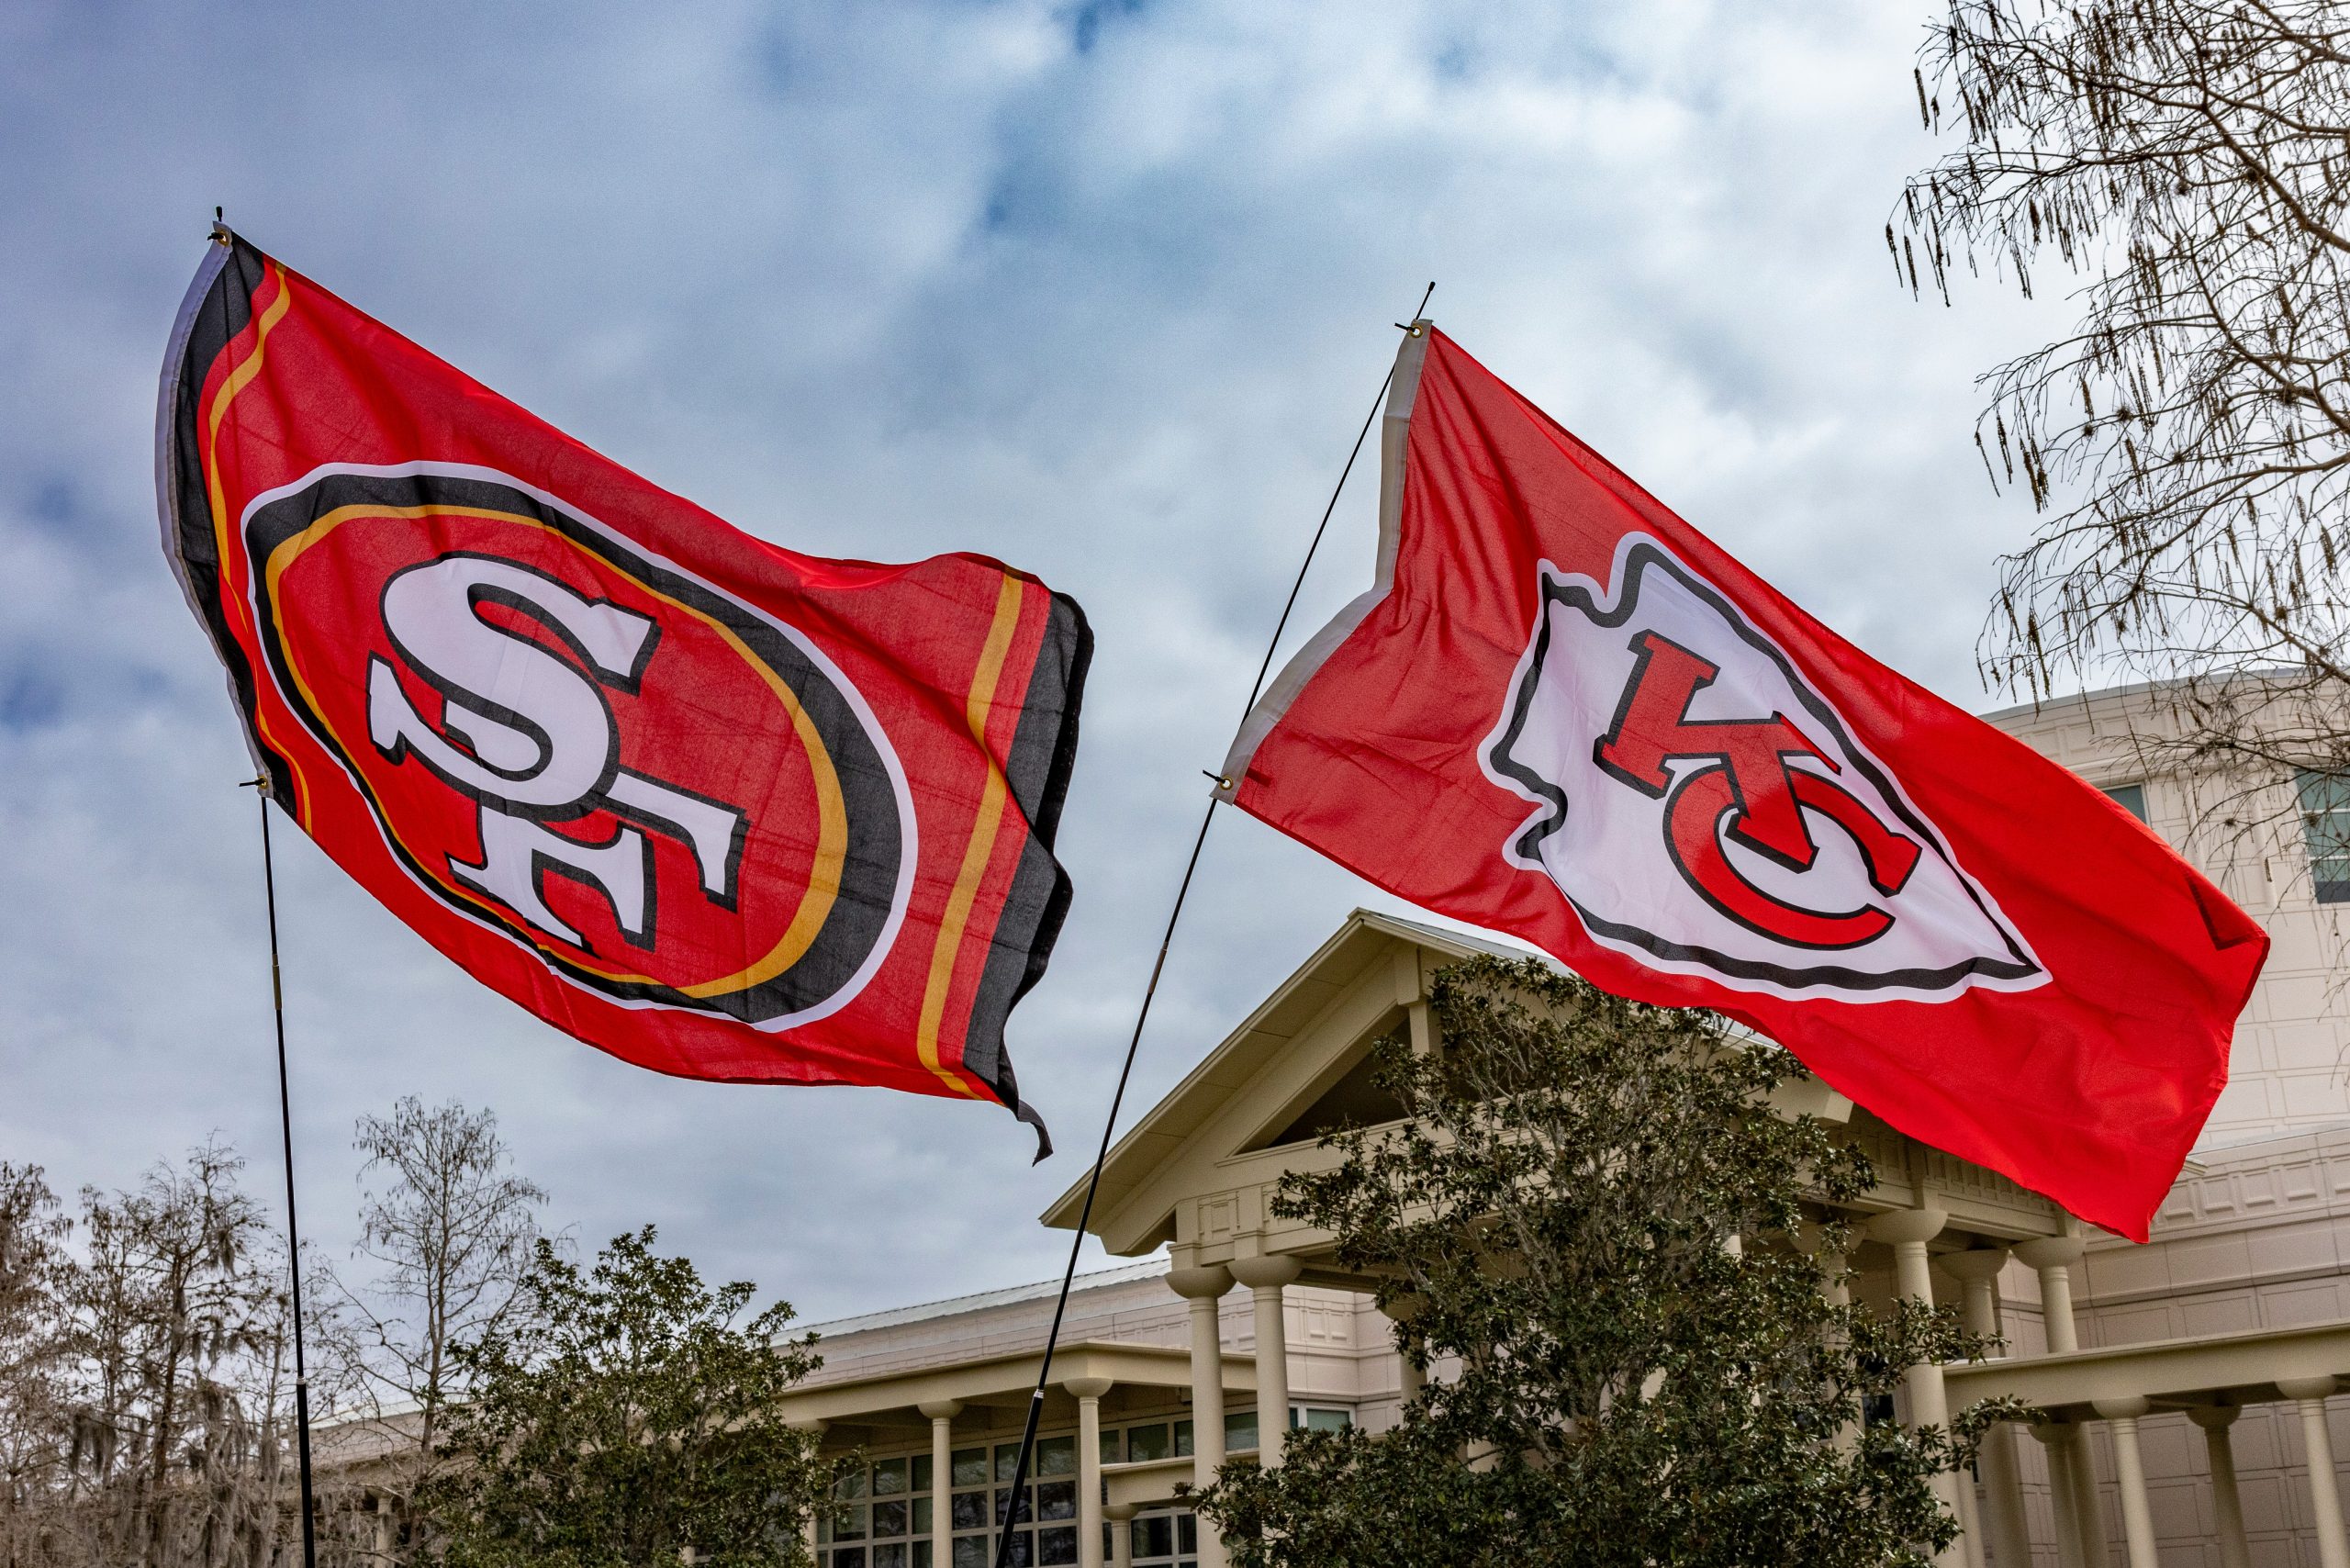 Two flags flying side by side, SF 49ers and KC chiefs